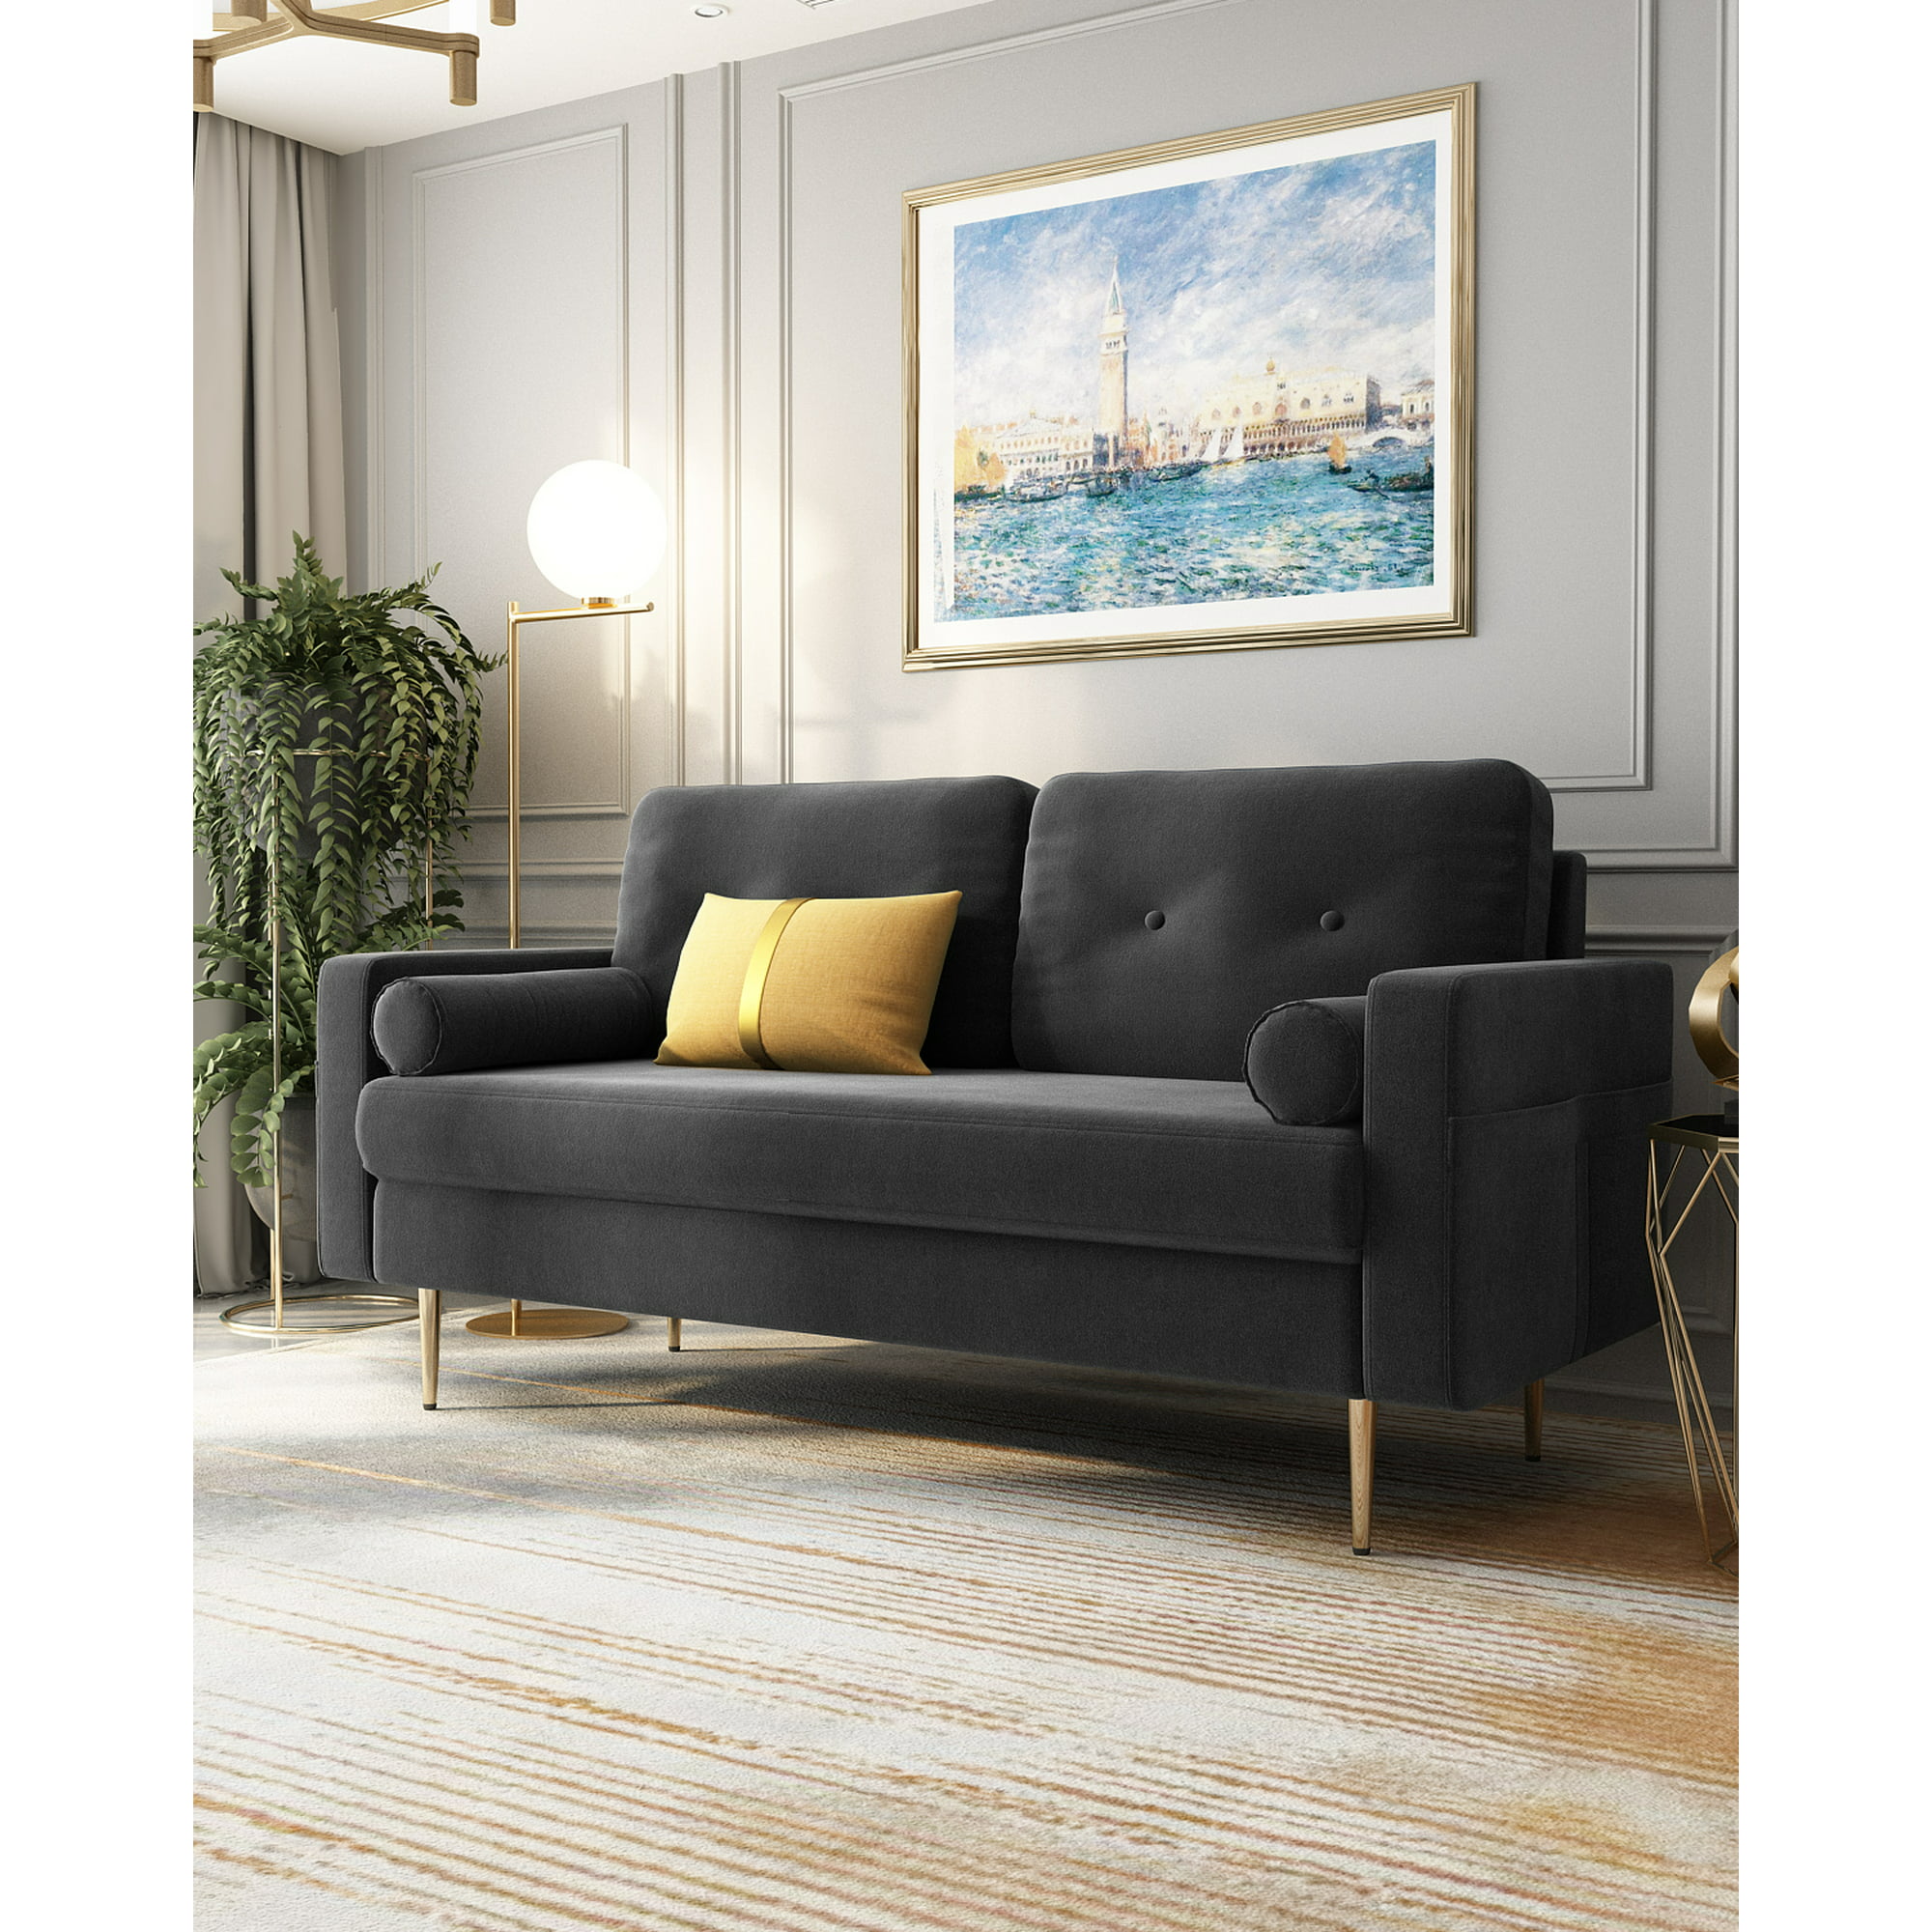 Sofa In A Box Real Velvet Modern Design 2 Seats Cozy Sofa Couch Includes Golden Legs And Two Comfortable Tufted Cushions Dark Grey Available In 6 Colors Walmart Canada